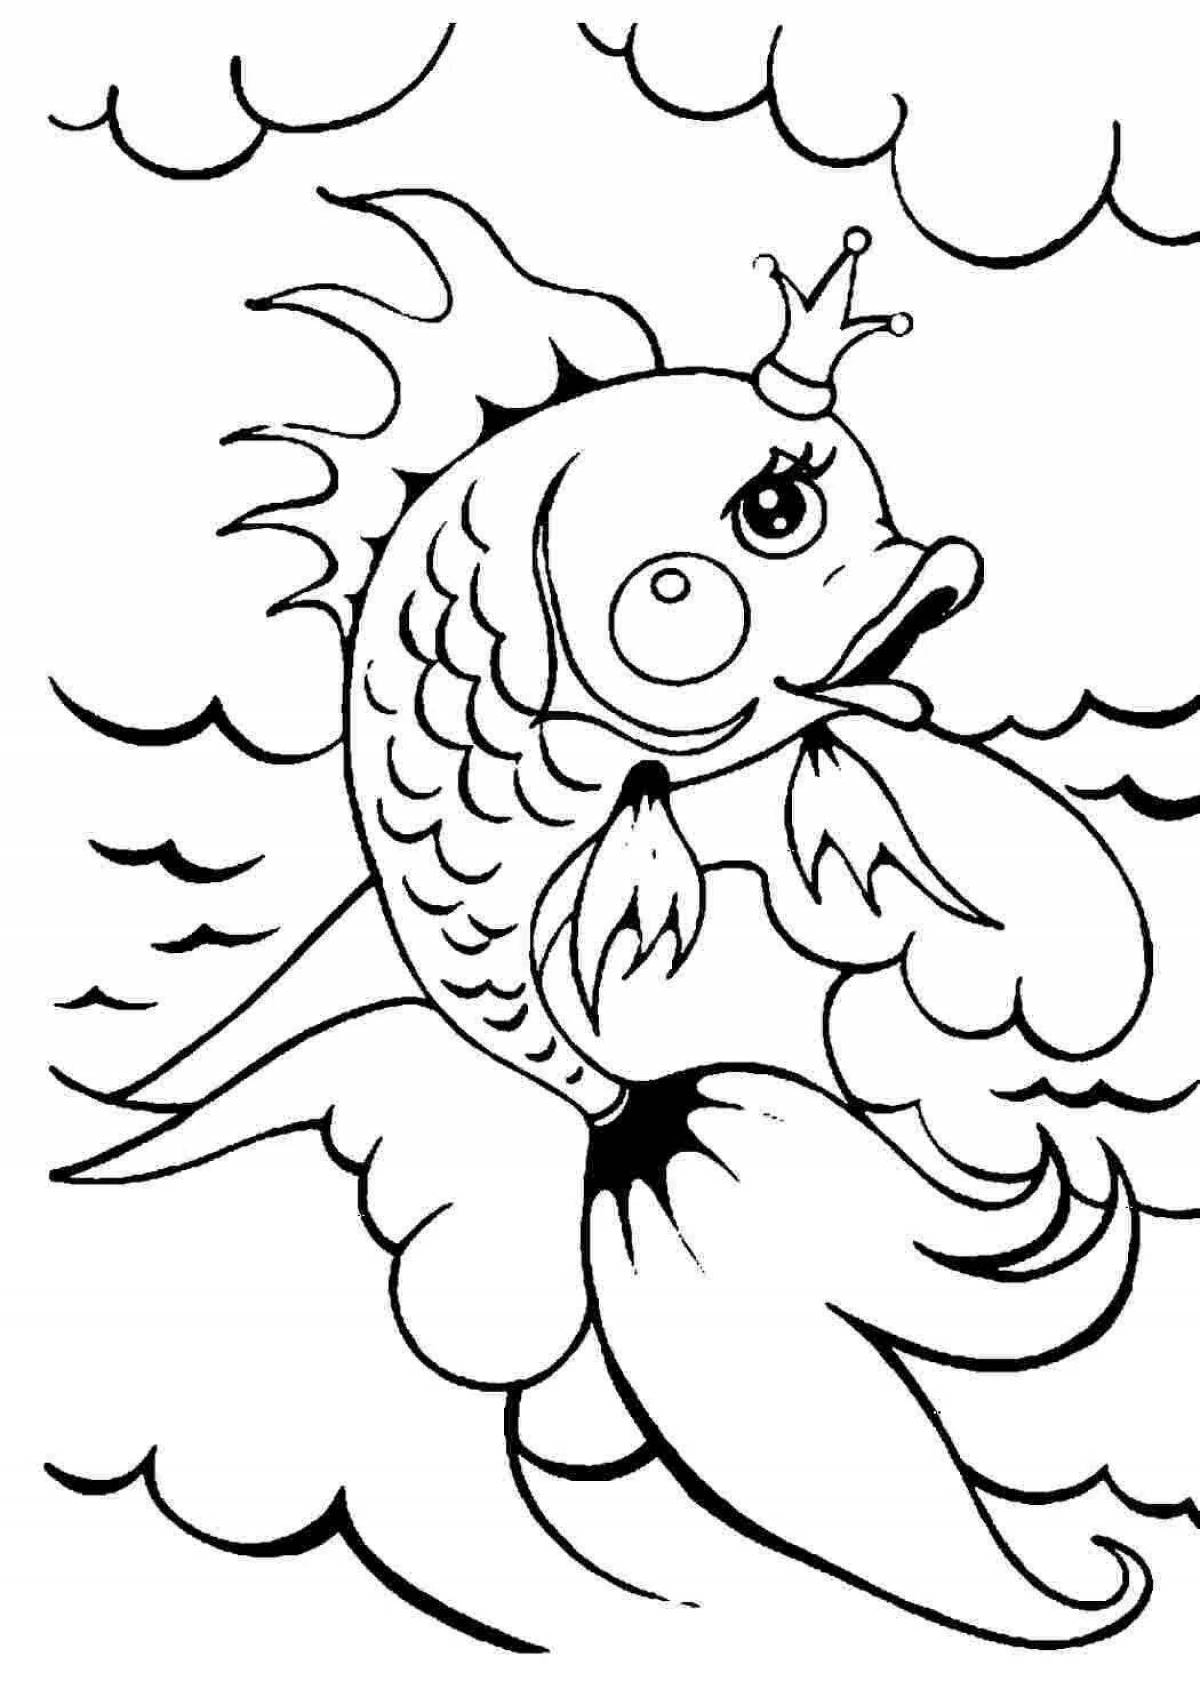 Adorable fish and fish coloring book for kids